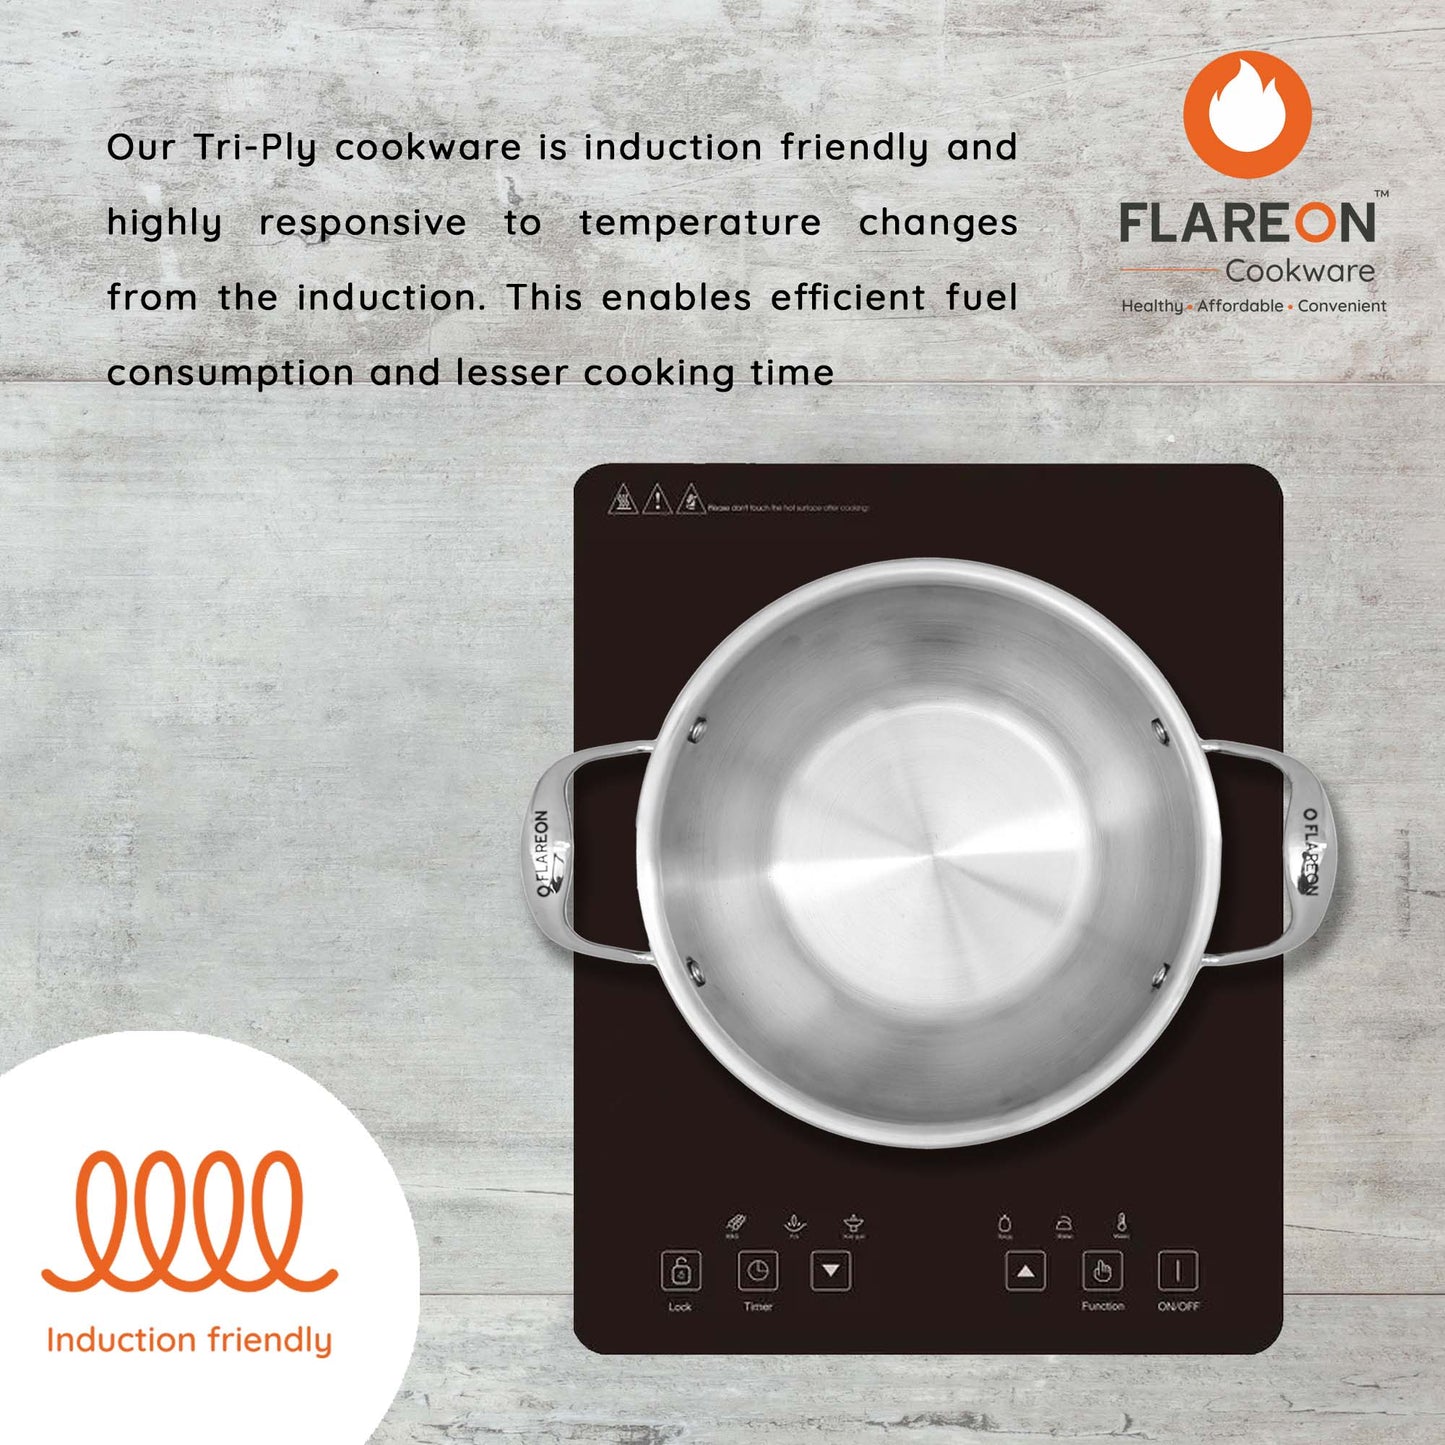 FlareOn's Stainless Steel- Induction Instructions